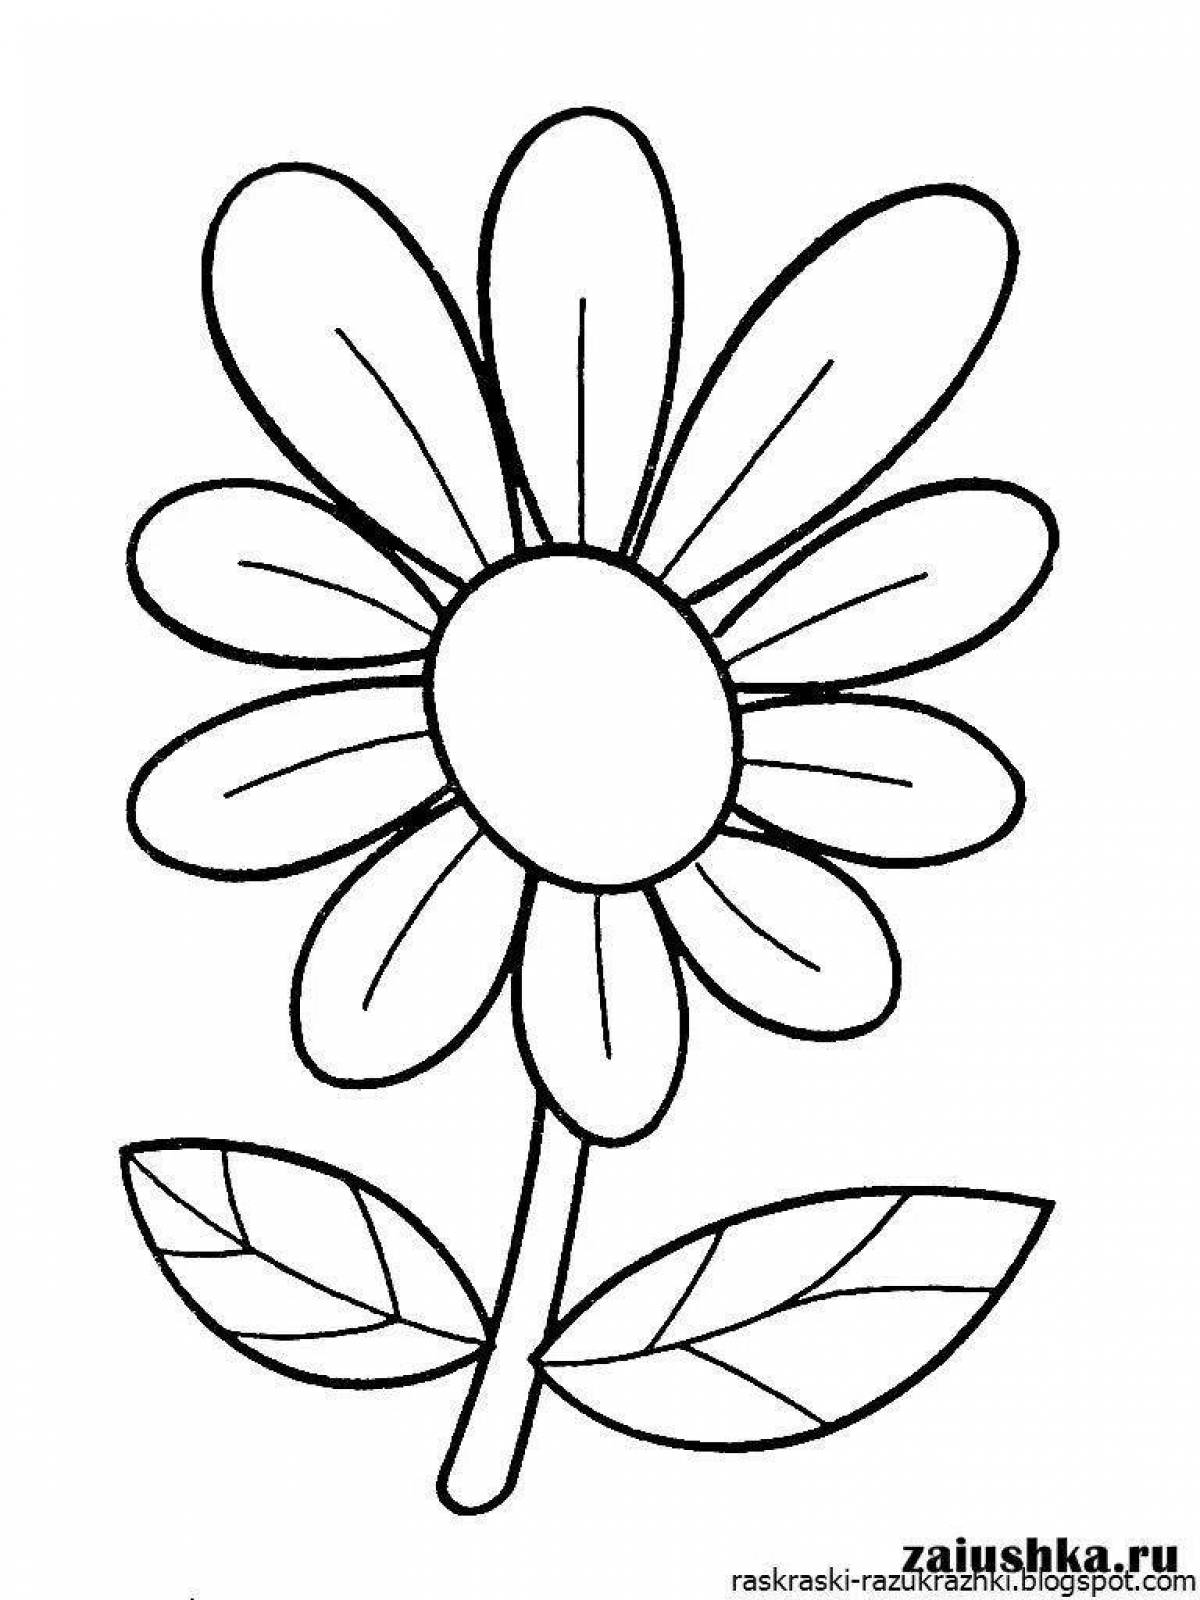 Coloring book exquisite chamomile pattern